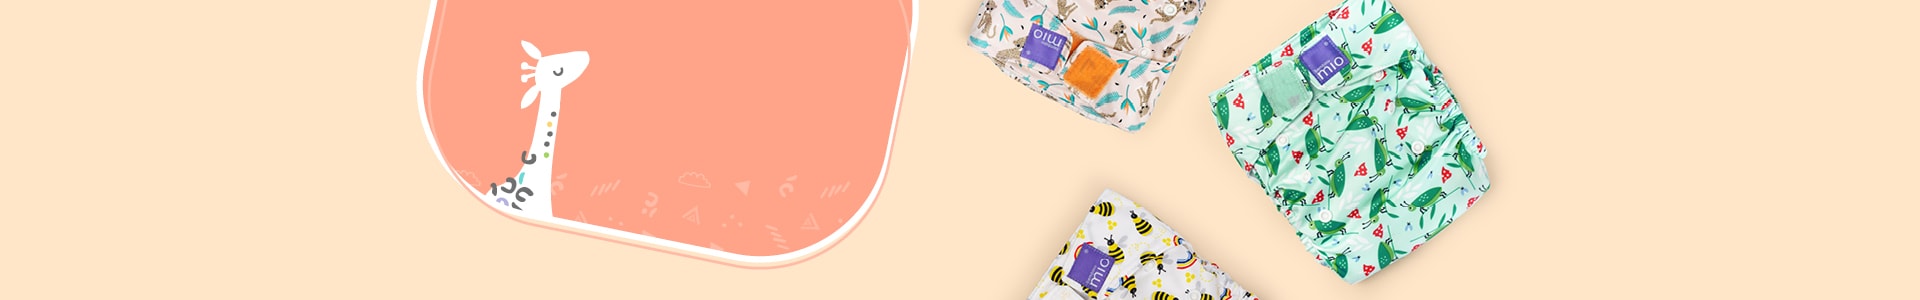 miosolo all in one nappy collection page banner with three miosolos